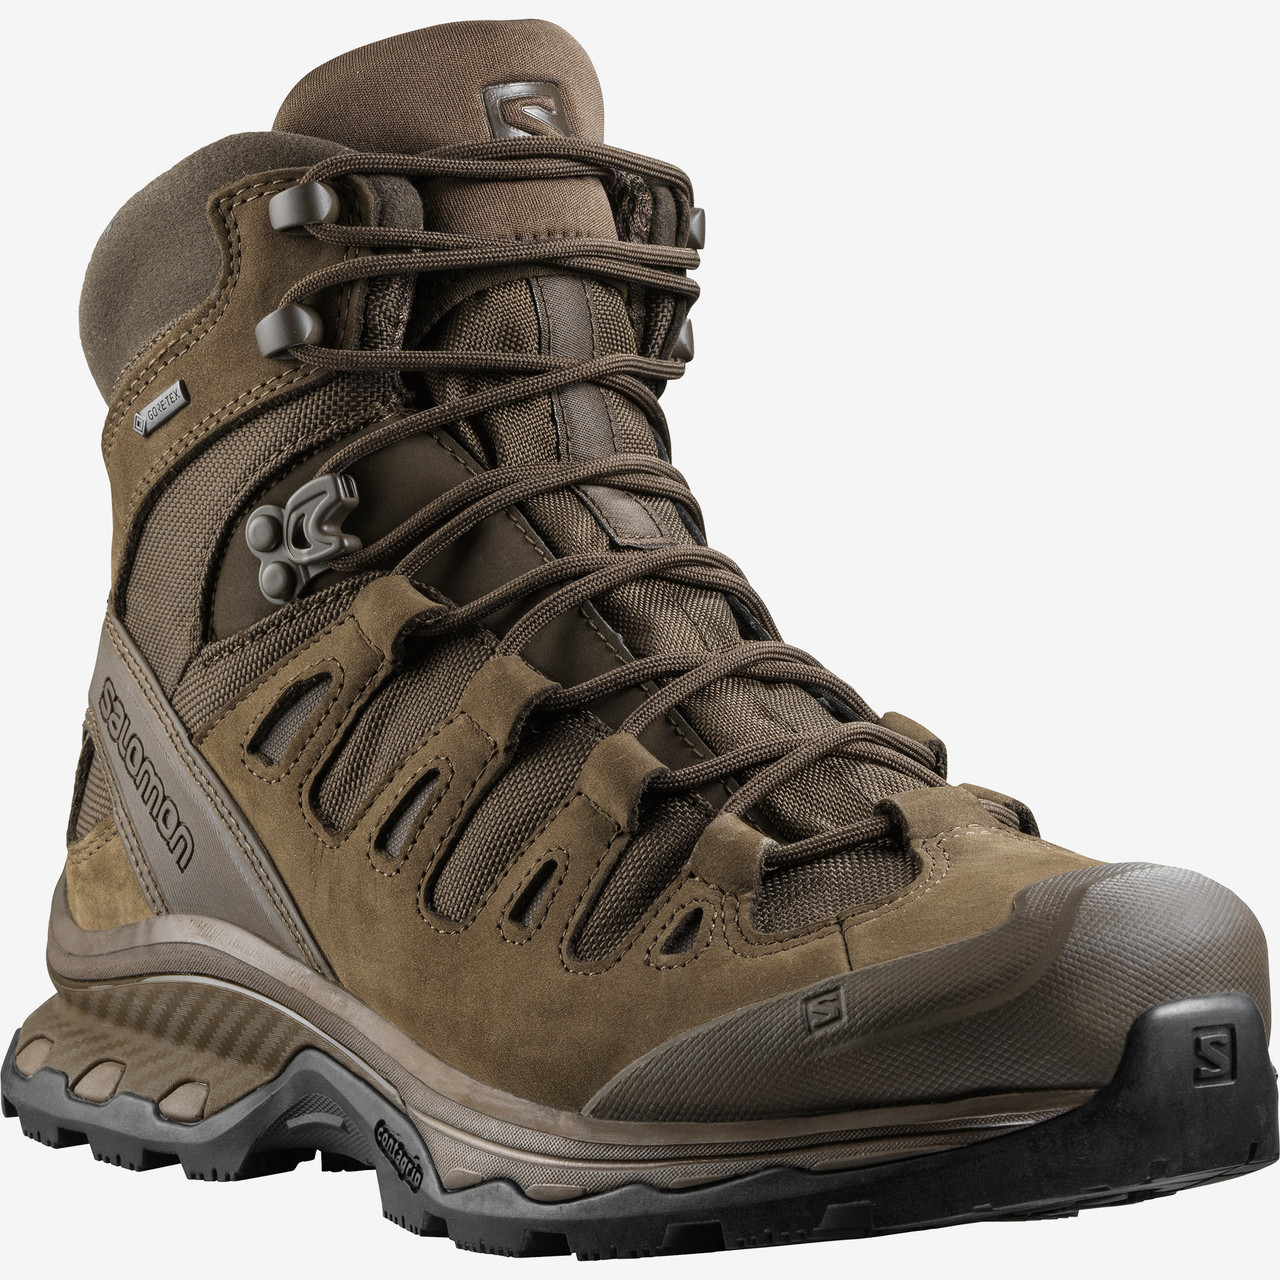 Salomon L40723200 Quest 4D GTX Forces 2 6 inch Boots, or Casual, Waterproof, available in Ranger Green, Slate Black, Black - Dana Safety